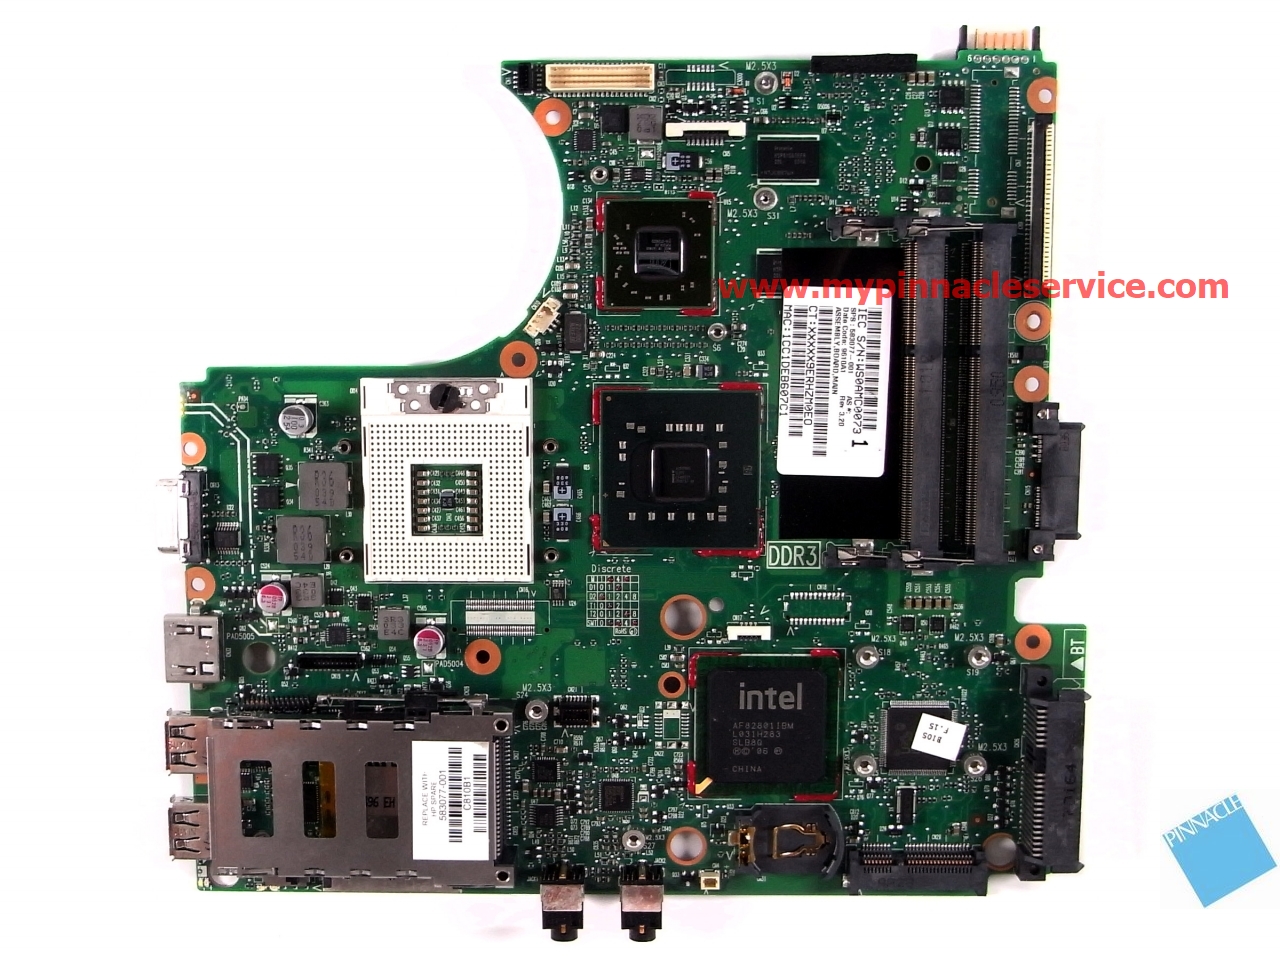 583077-001-motherboard-for-hp-probook-4411s-4510s-4710s-6050a2297301-r00107311.jpg